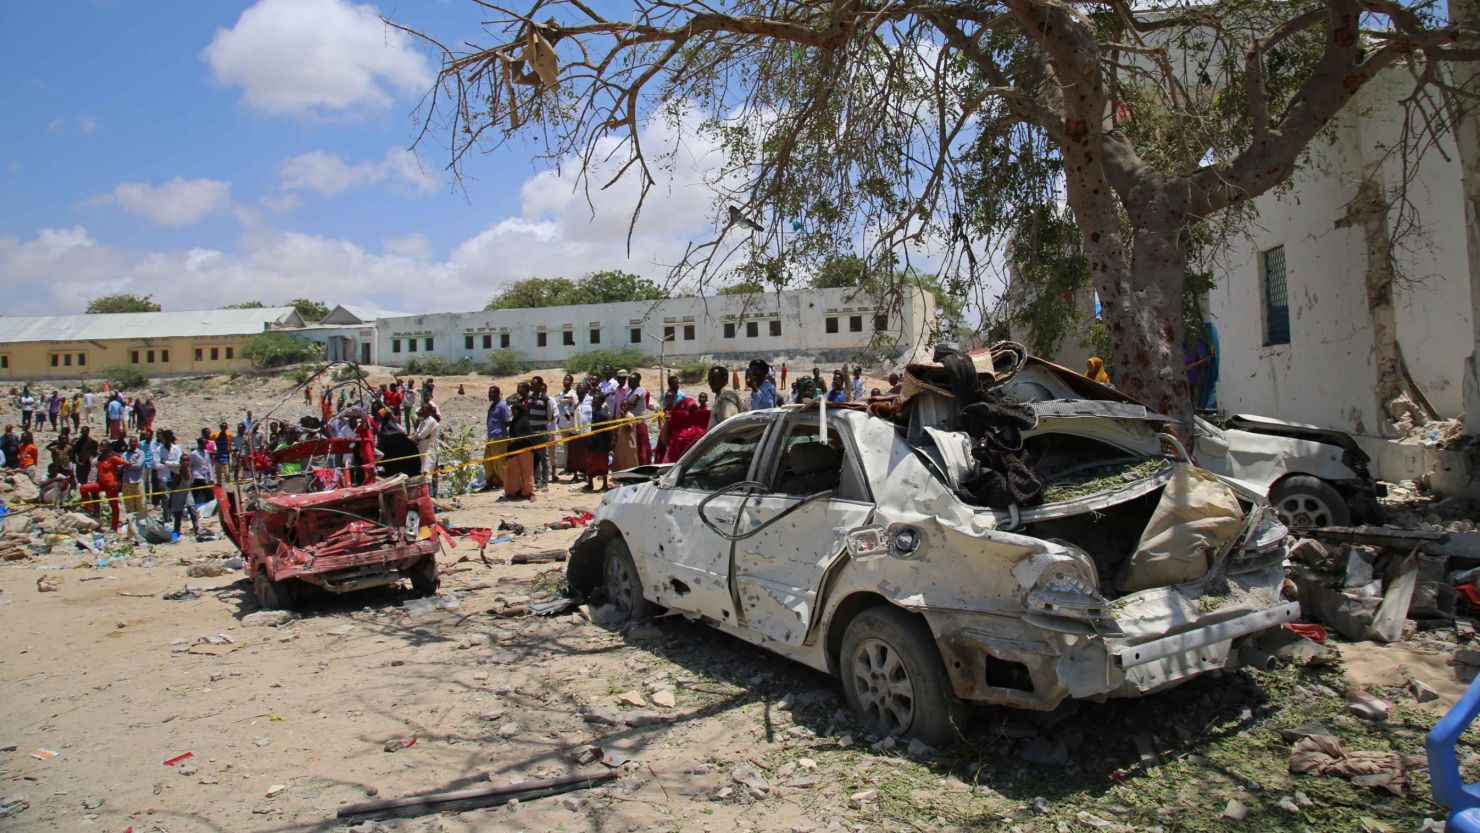 People inspect damage around the site after an attack carried out with a bomb-laden vehicle on September 02, 2018, in Mogadishu, Somalia.